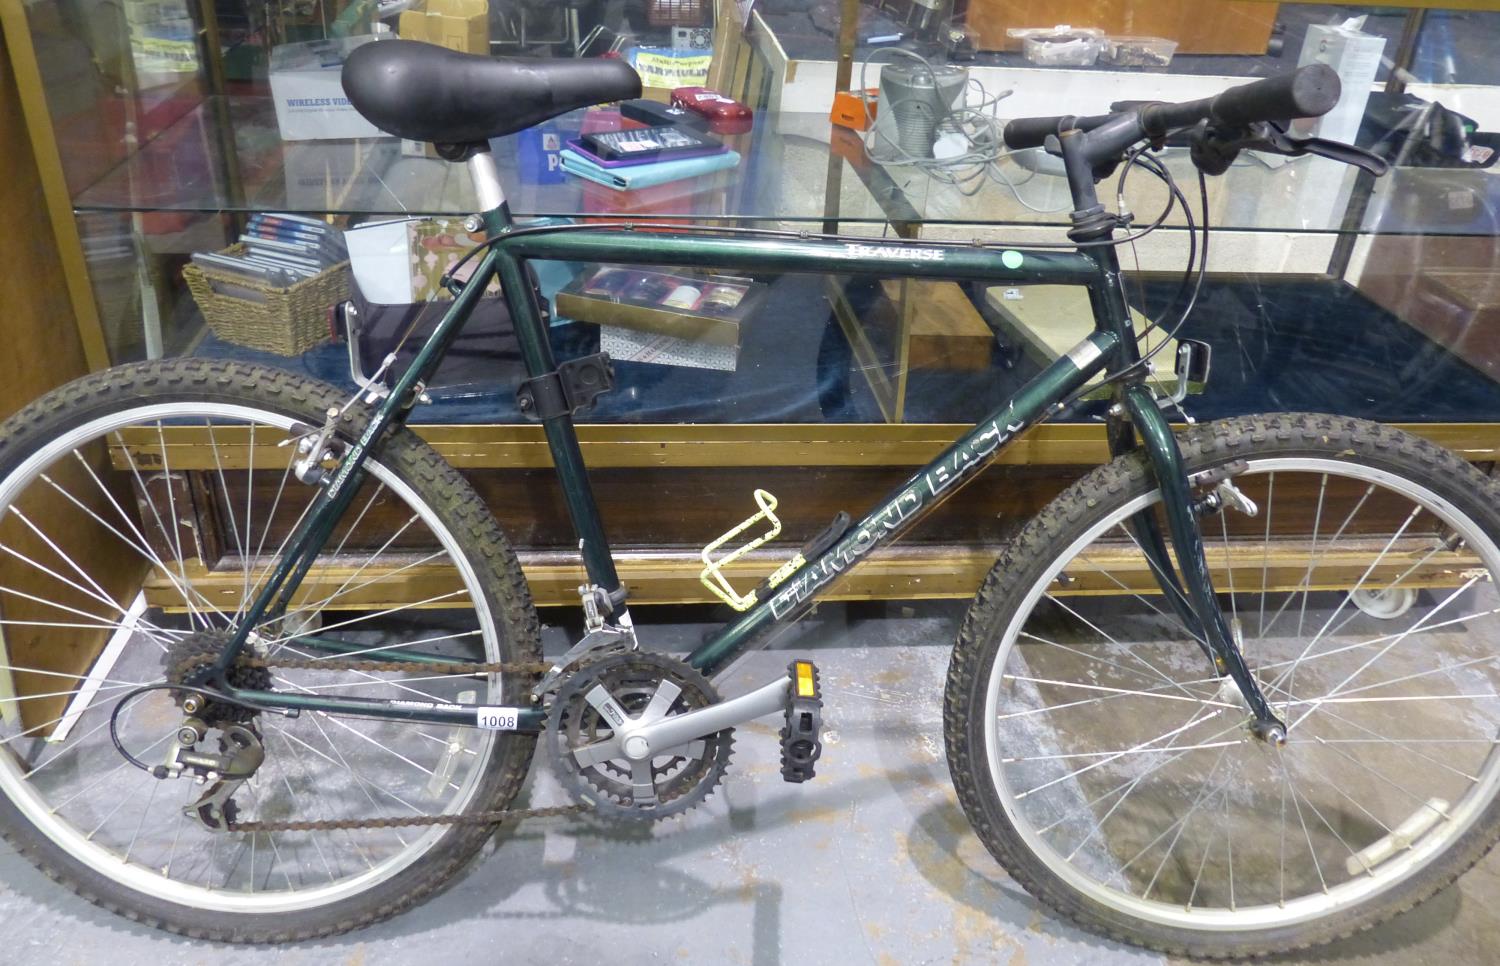 Diamond Back Traverse 21 inch frame road bike, with 21 gears, equipped with Shimano Altus V brakes